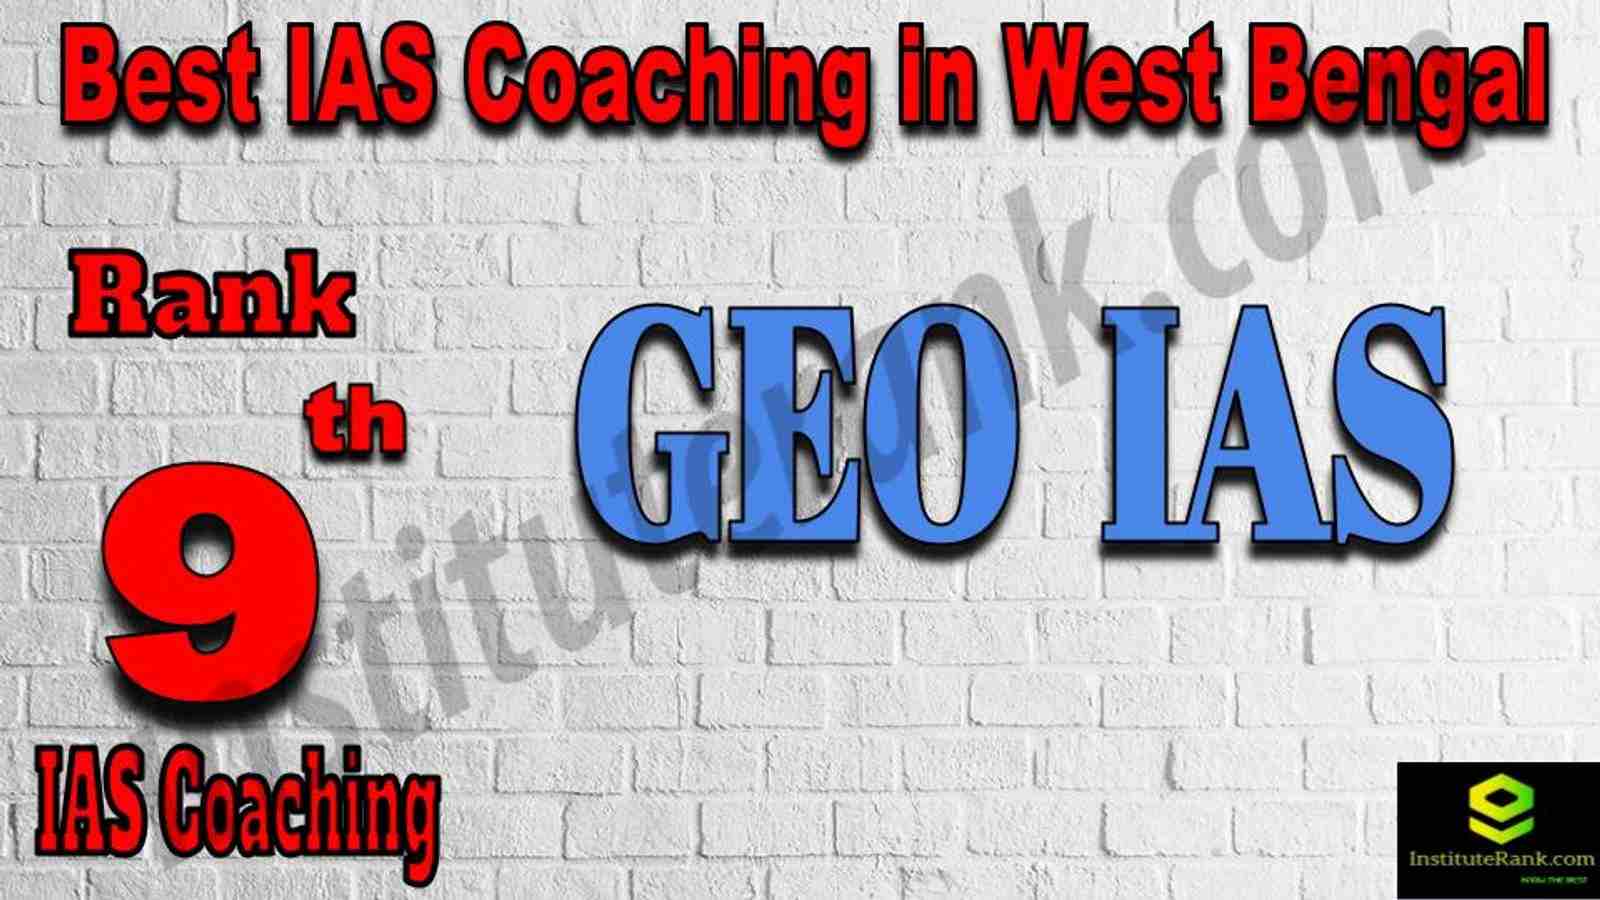 9th Best IAS Coaching in West Bengal